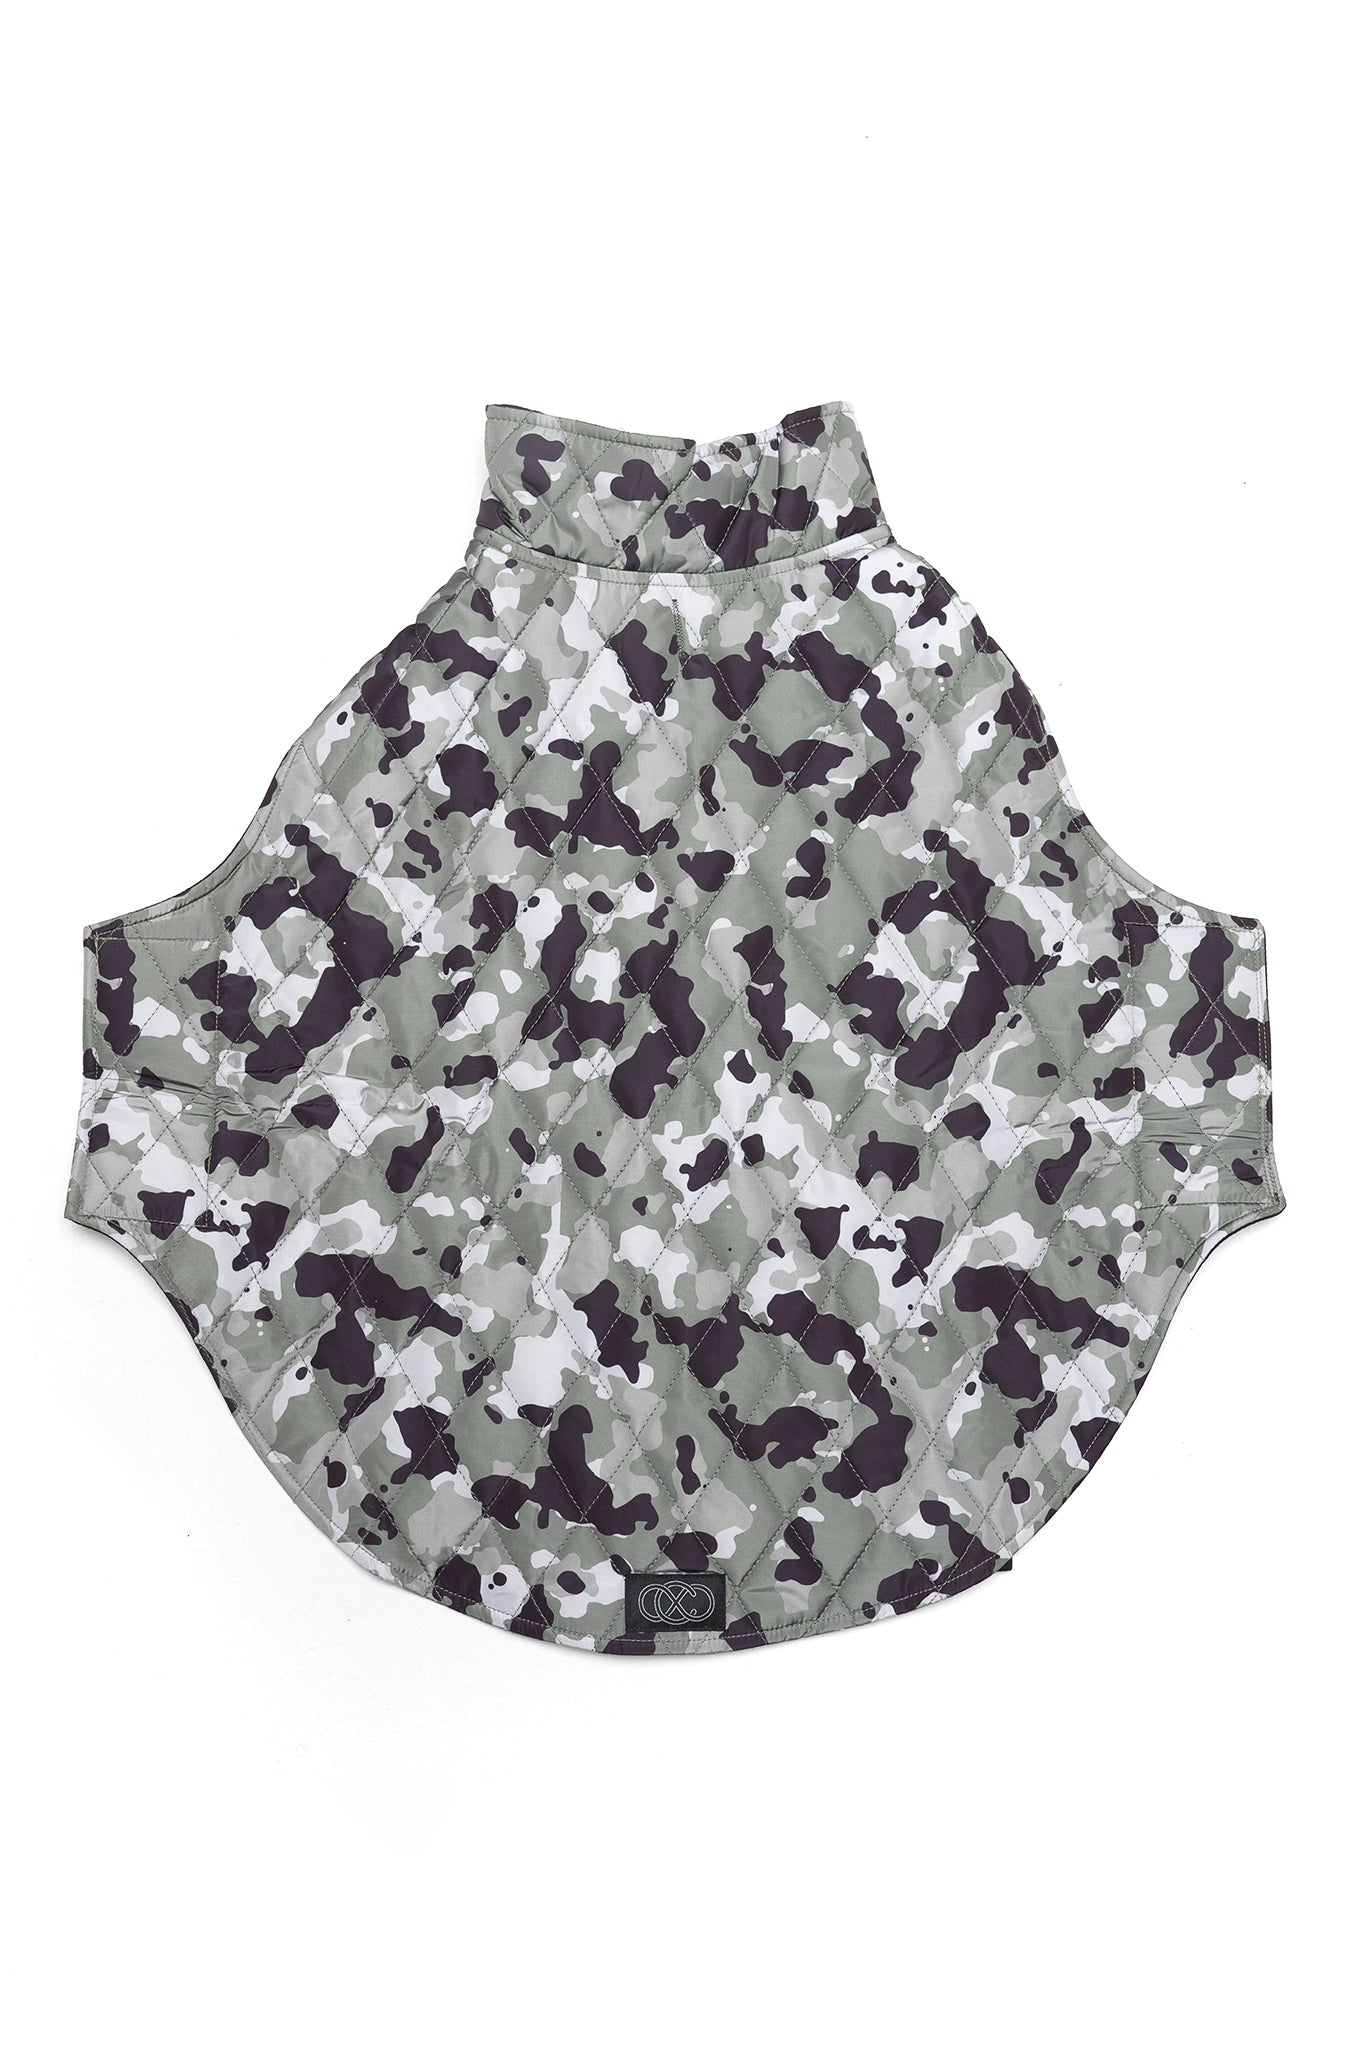 Foxtrot Dog Jacket in Camo Print laid on floor to show exterior of jacket when opened.